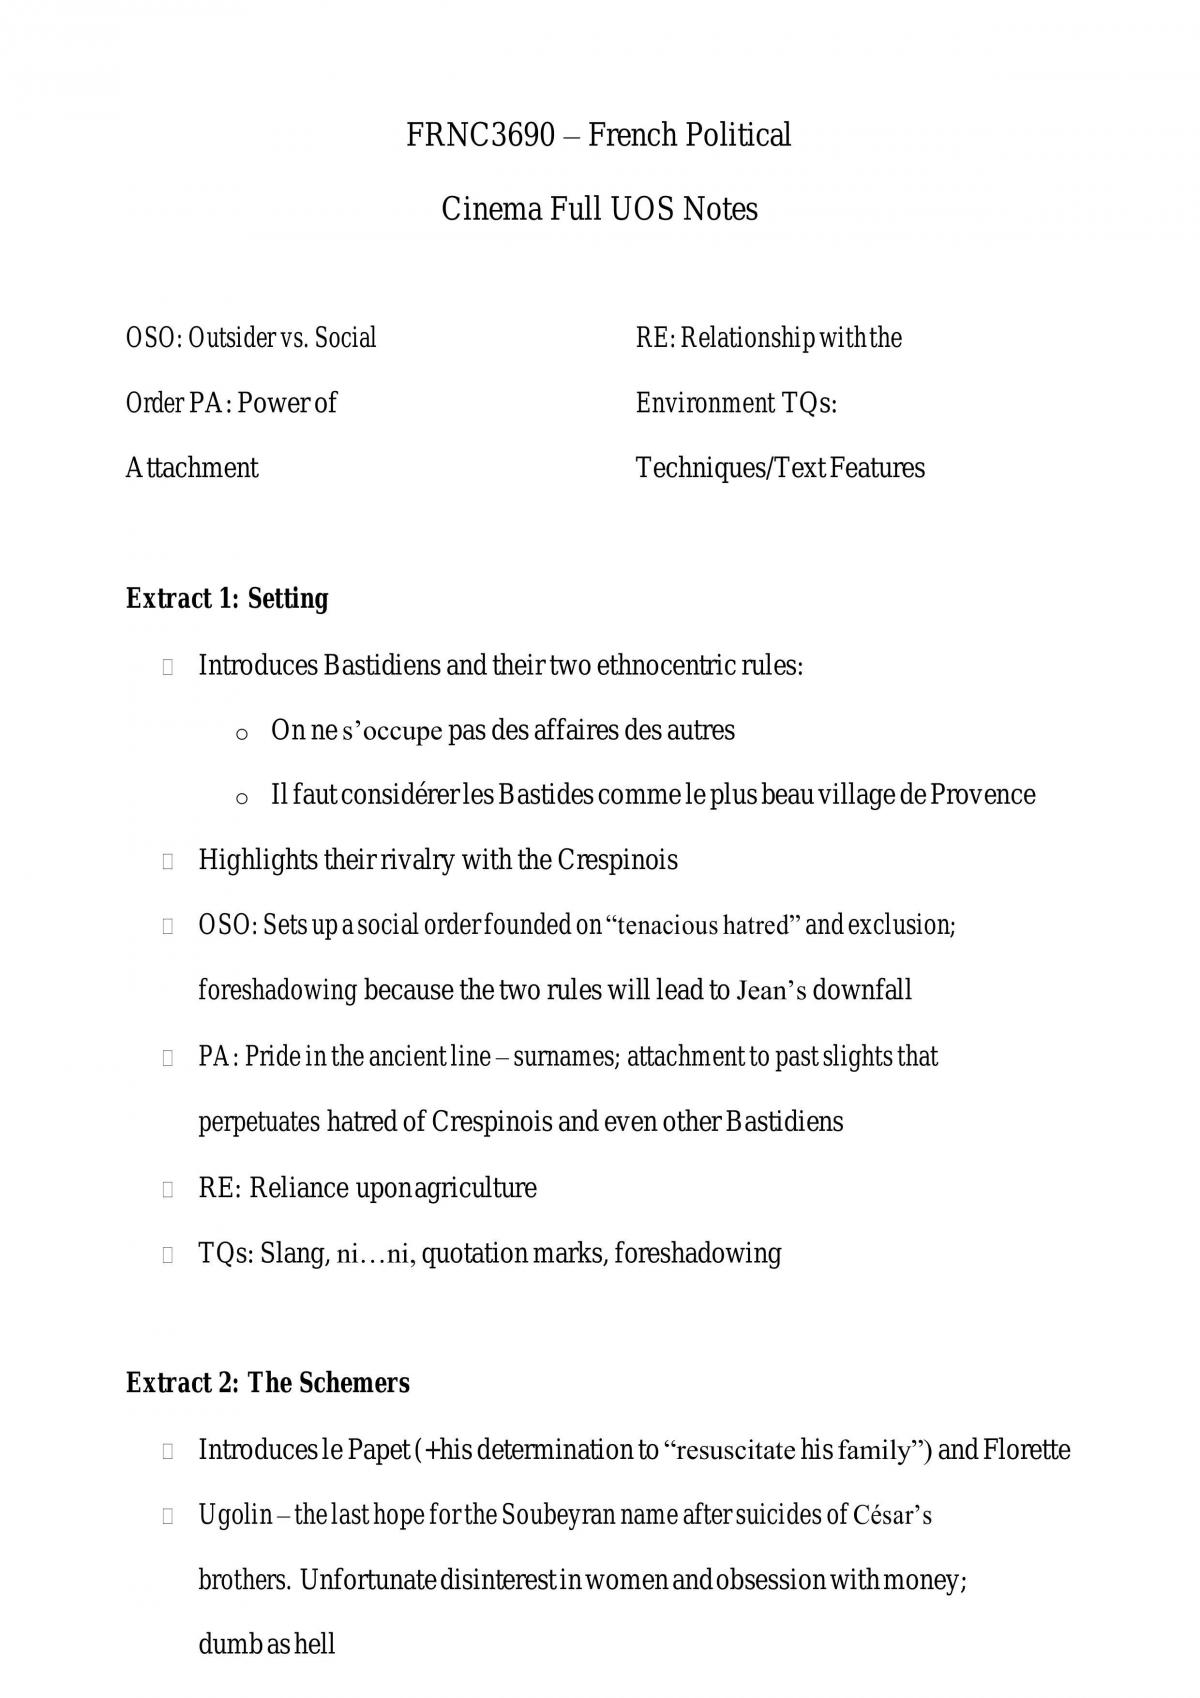 FRNC3690 Full and Complete Study Notes - Page 1